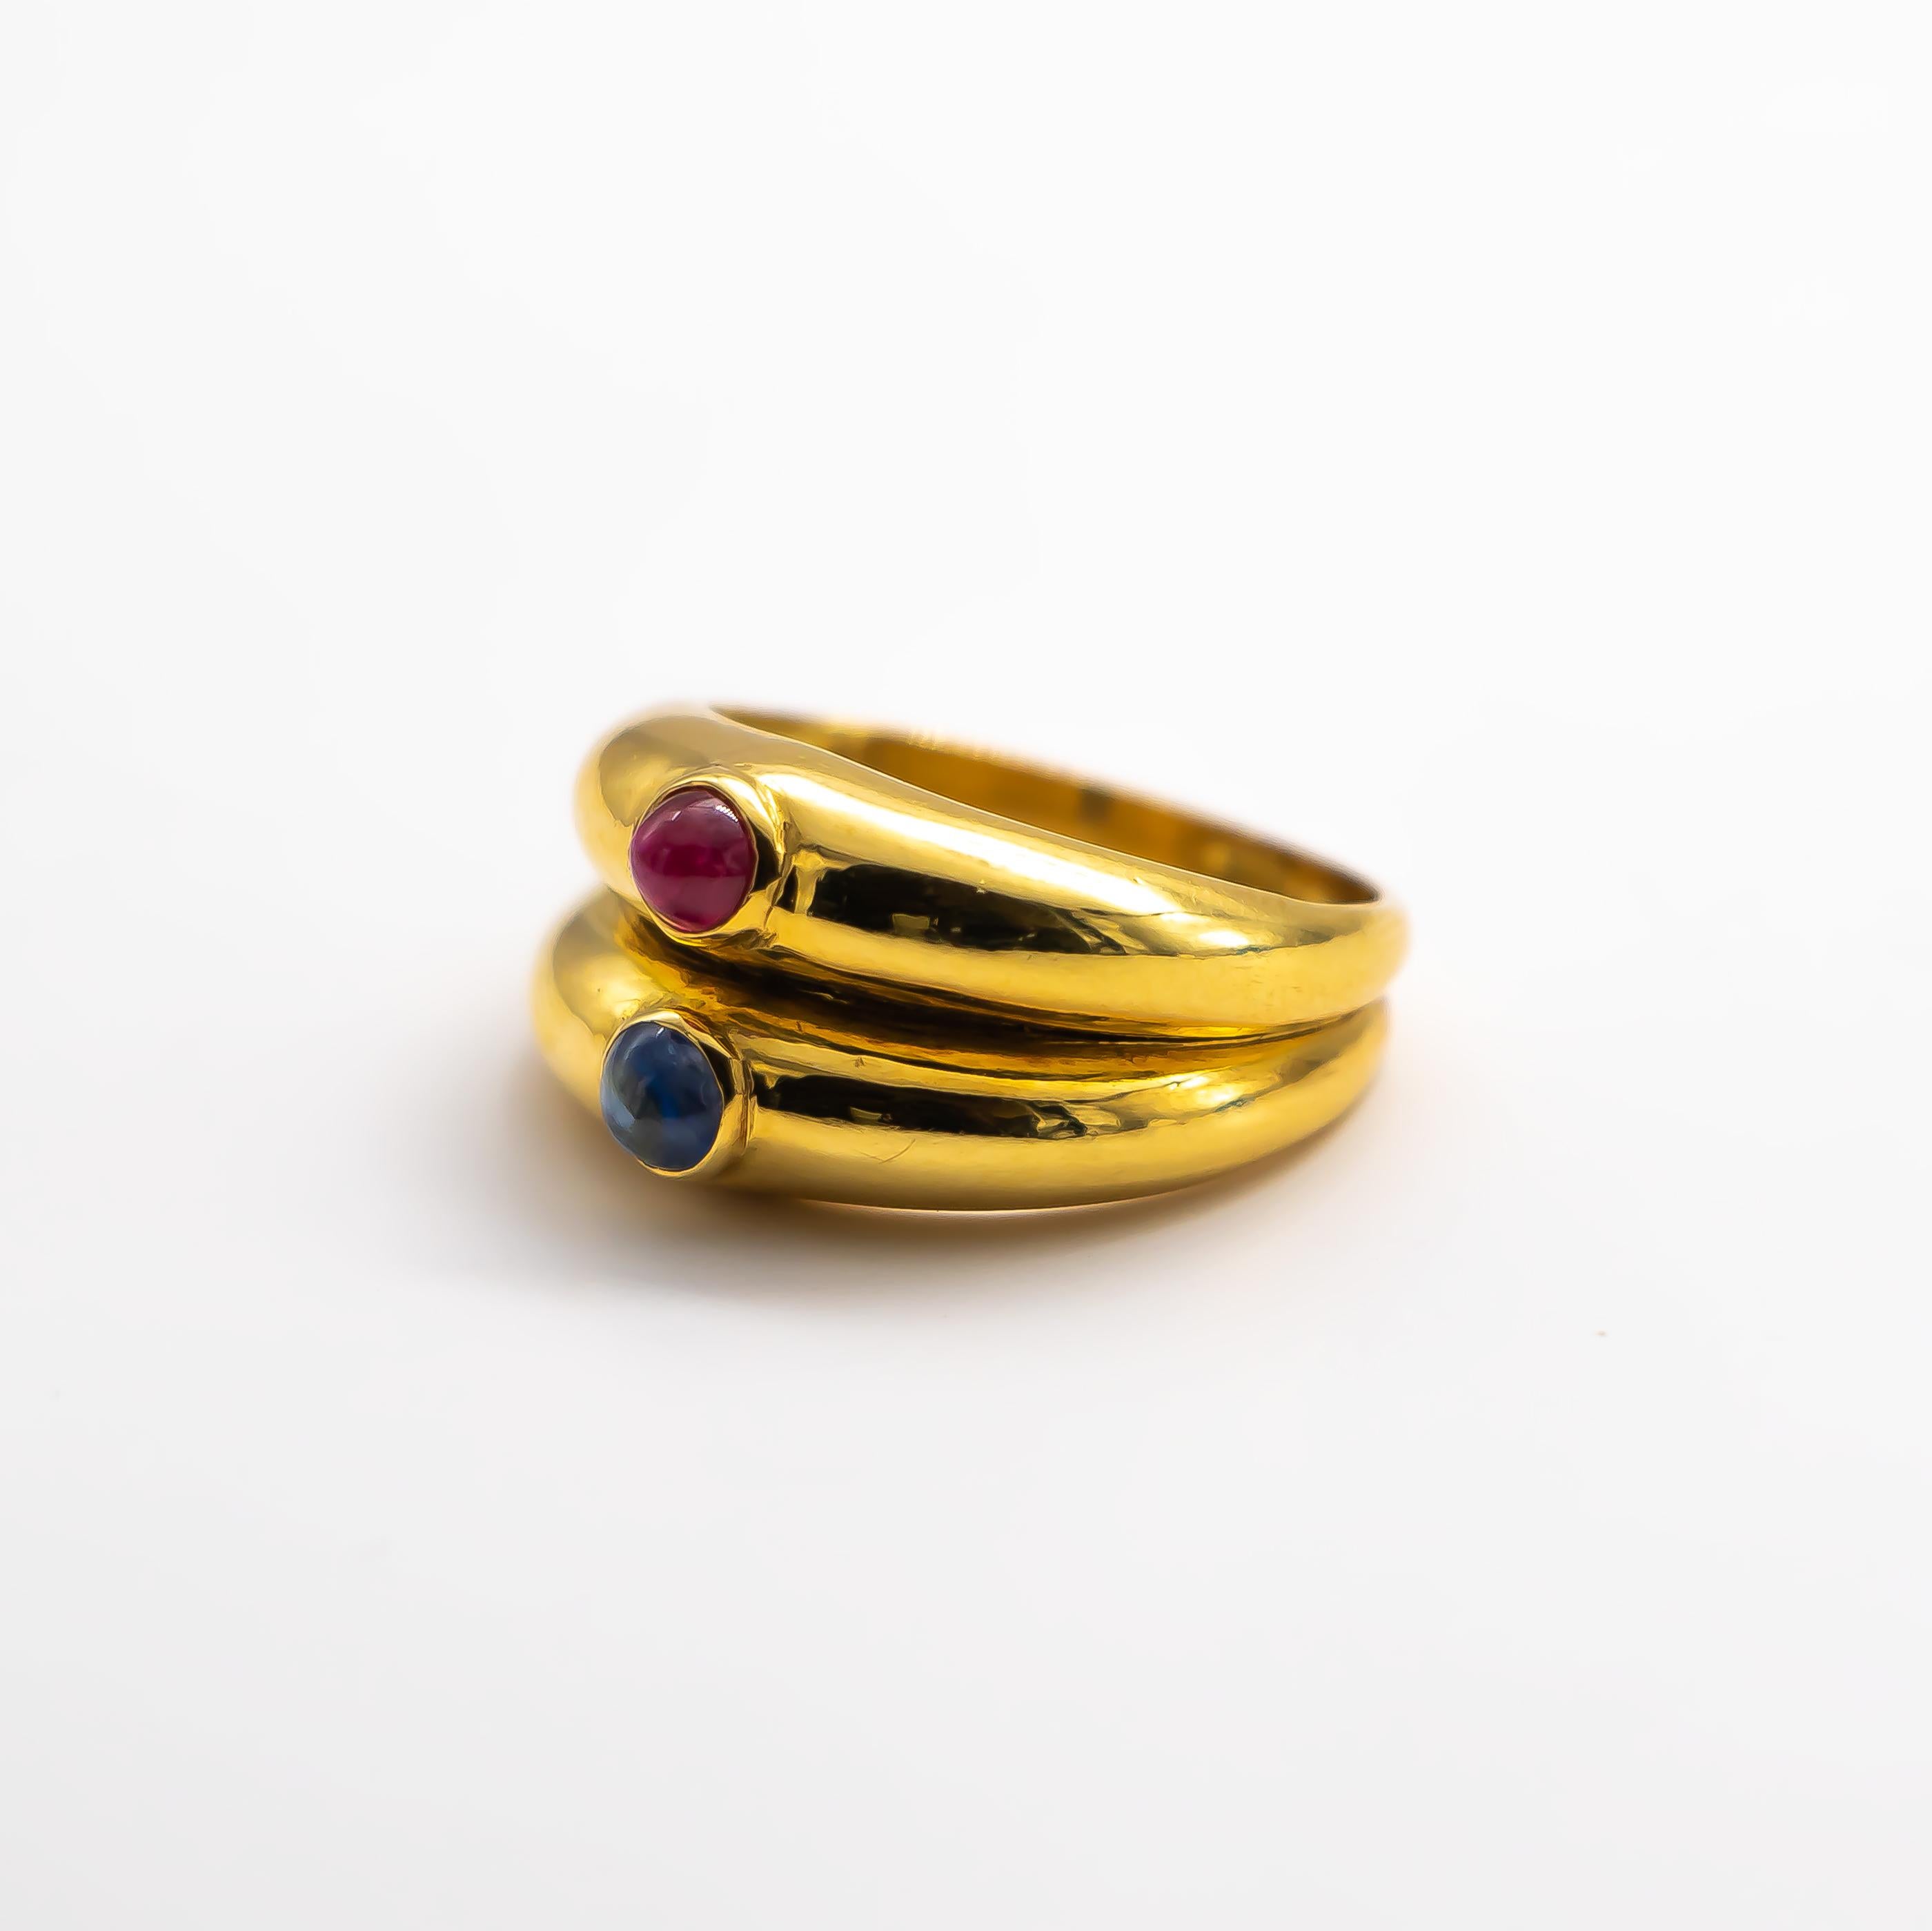 Cabochon 0.2 Carat Ruby and Cabochon 0.2 Carat Sapphire Ring 18K Yellow Gold 3